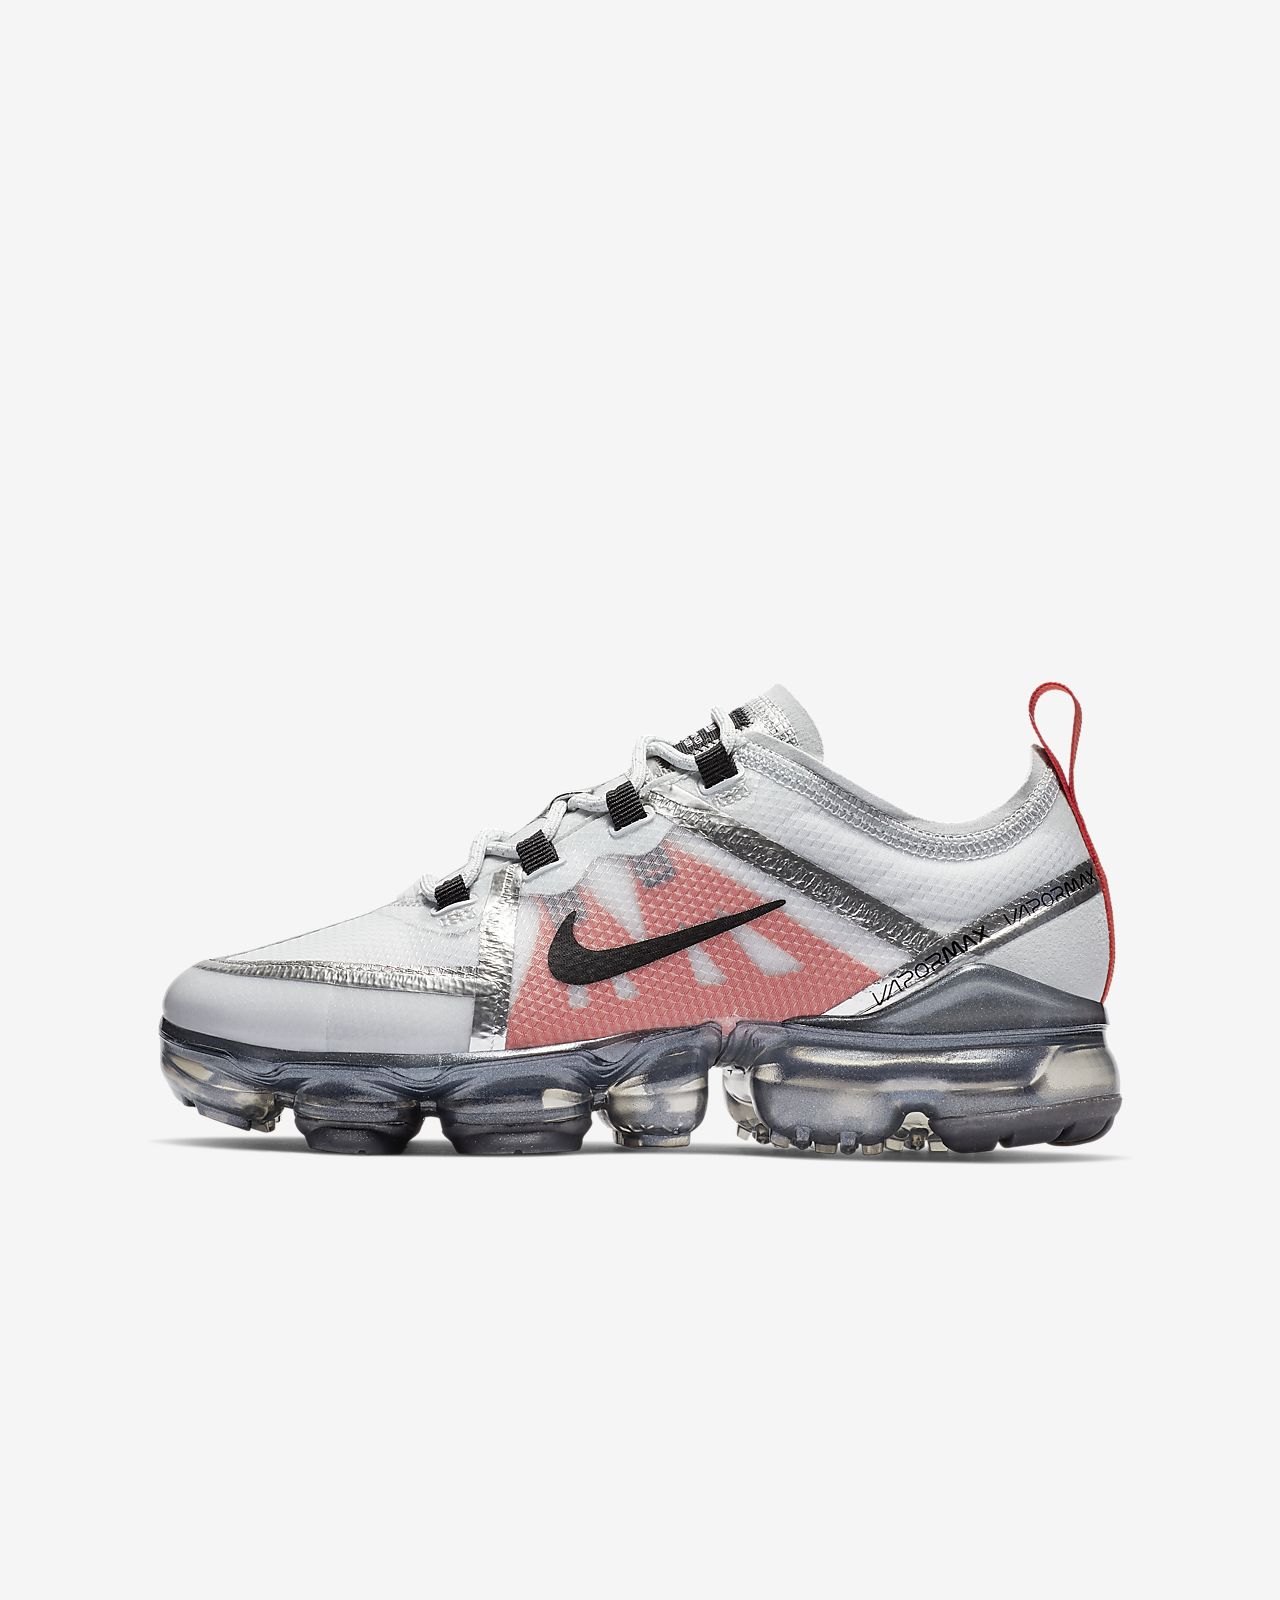 Nike Vapormax Junior Size 6 Online Sale, UP TO 52% OFF